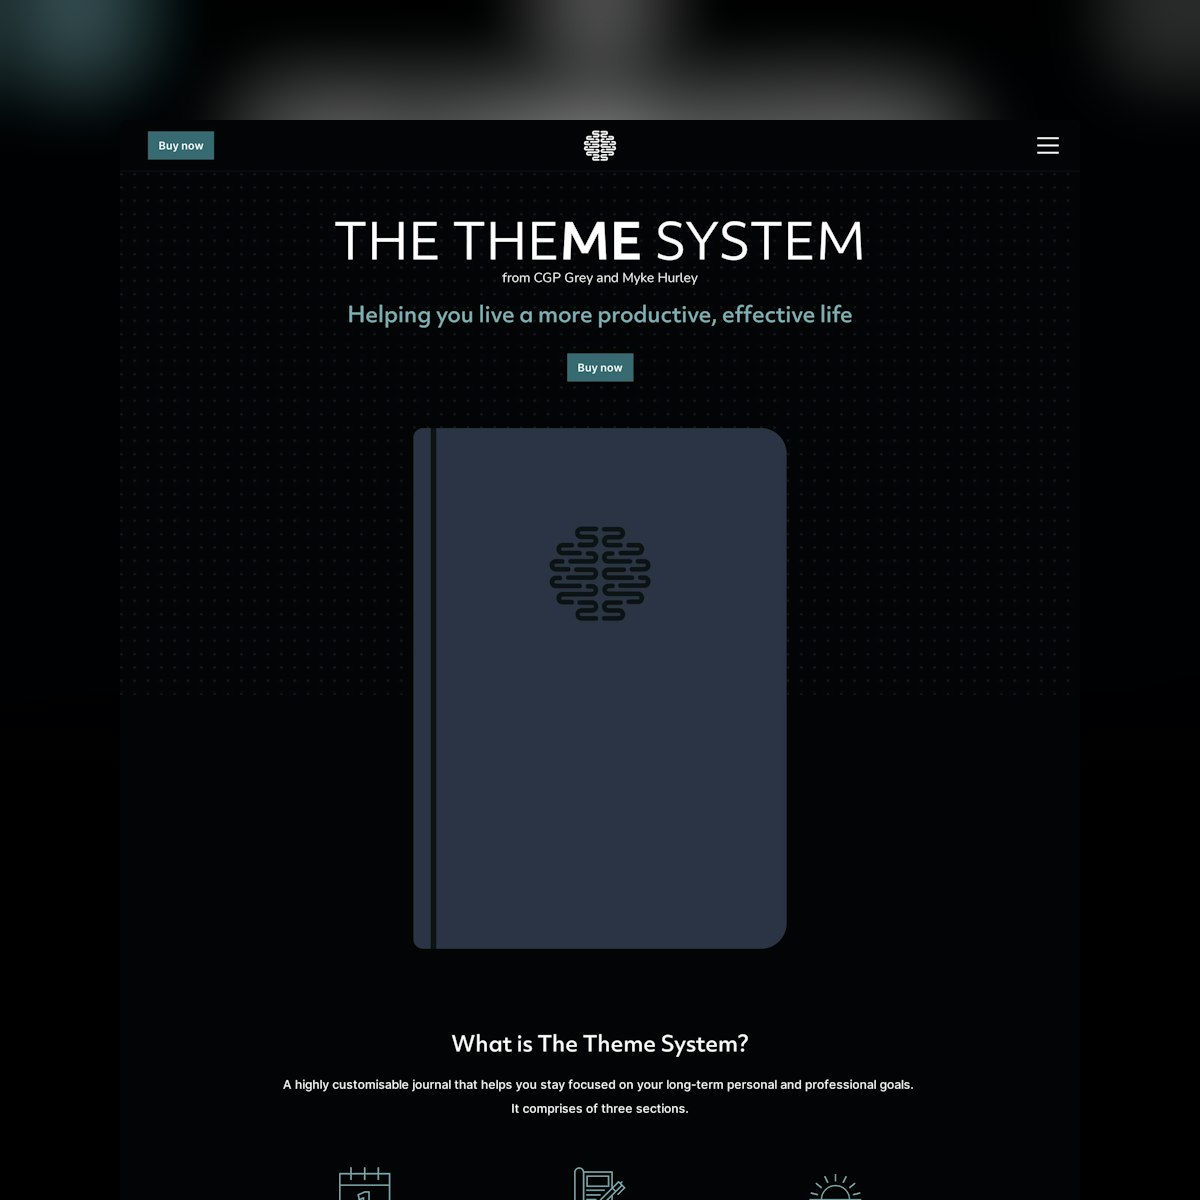 Product Page screen design idea #335: Website Inspiration: The Theme System